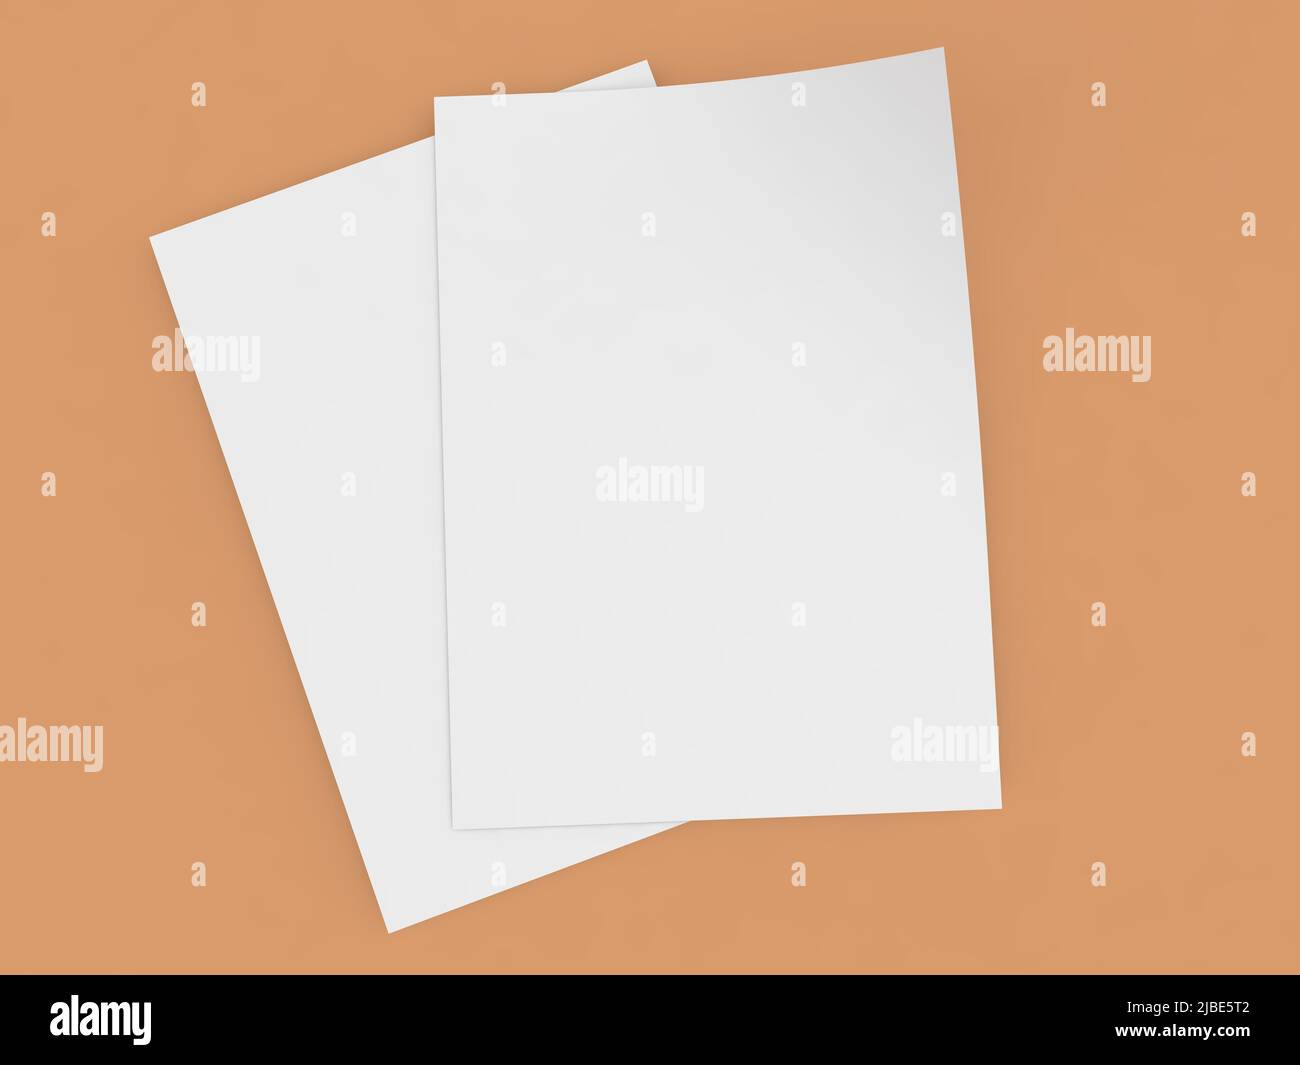 A4 size office paper sheets on a brown background. 3d render illustration. Stock Photo